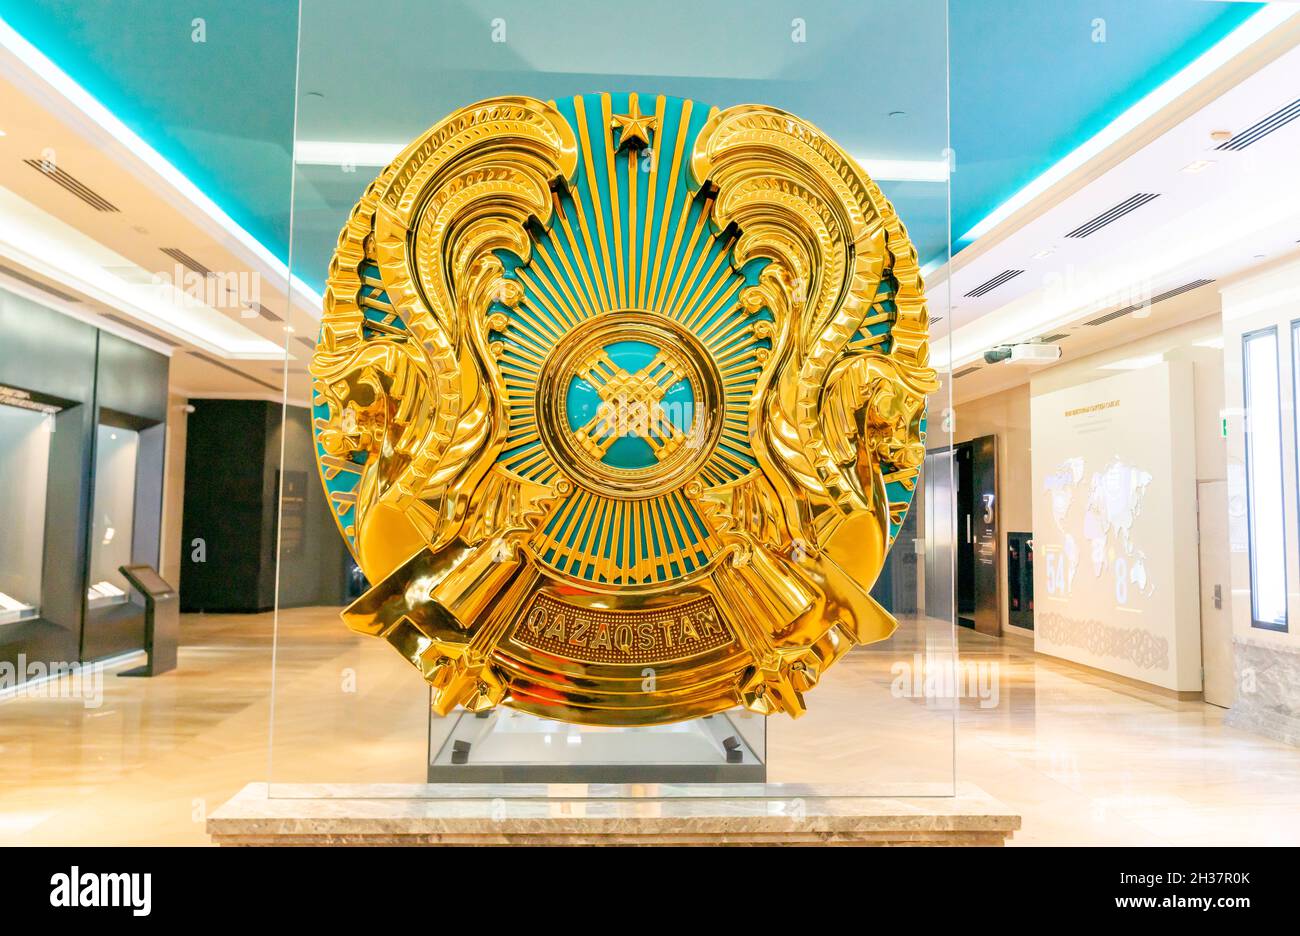 Big gilded model of national emblem and coat of arms of Kazakhstan, on display in National Museum of Kazakhstan, Astana, Nur-Sultan, Kazakhstan Stock Photo